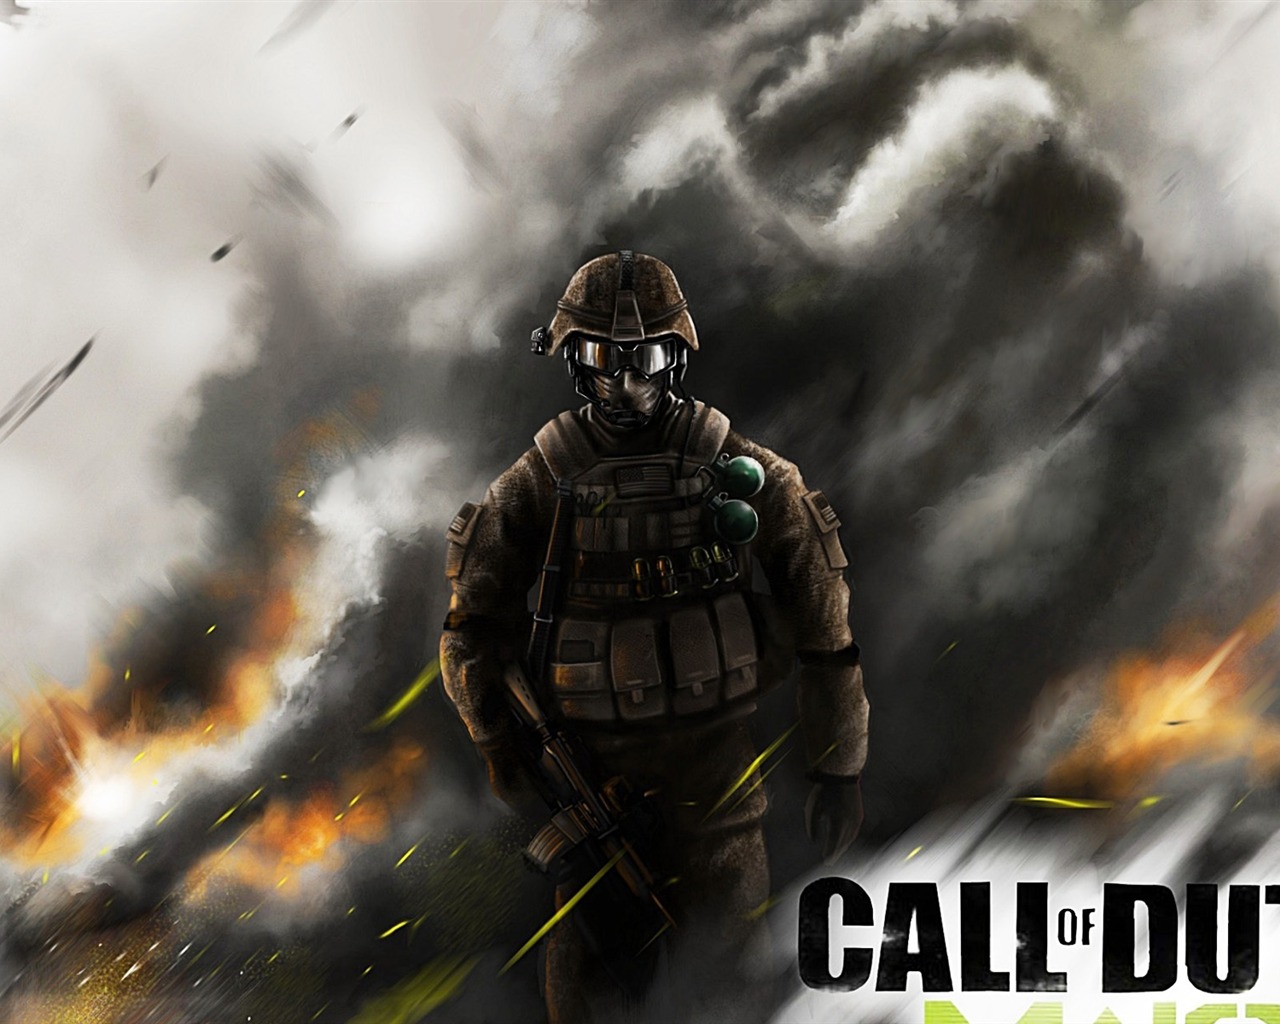 Call of Duty: MW3 wallpapers HD #15 - 1280x1024